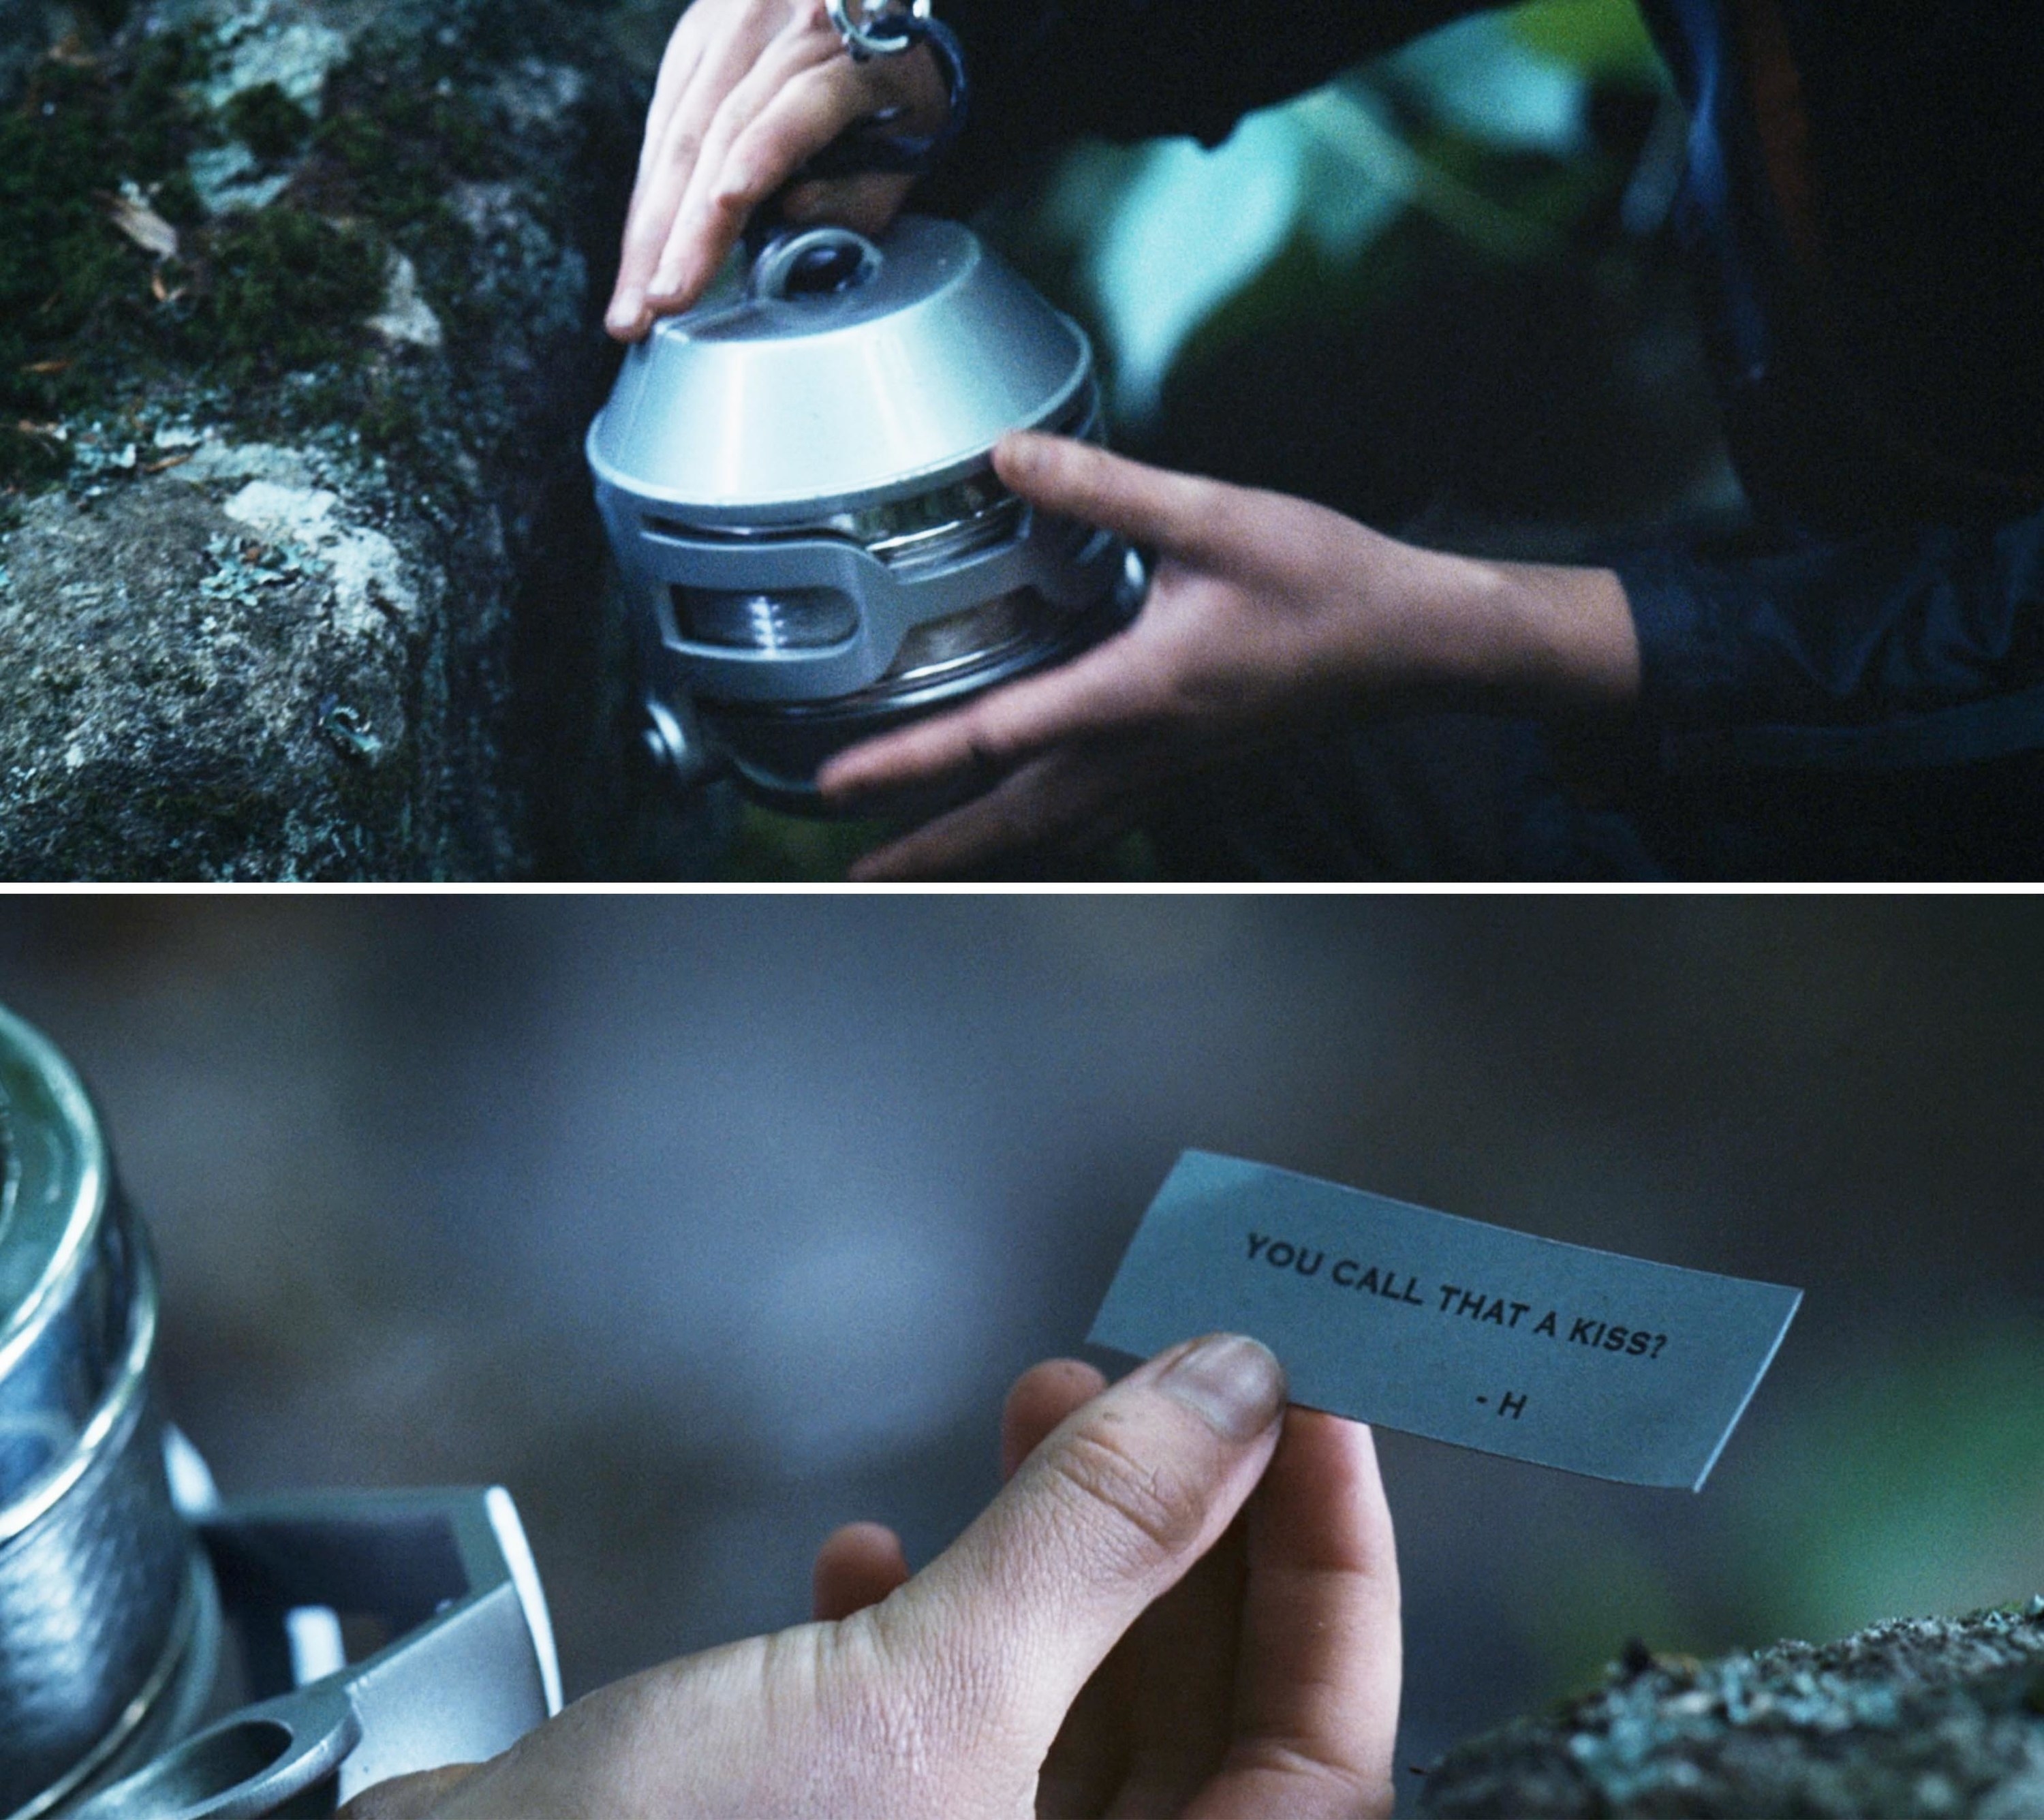 katniss opening the basket and finding a note readying, you call that a kiss?